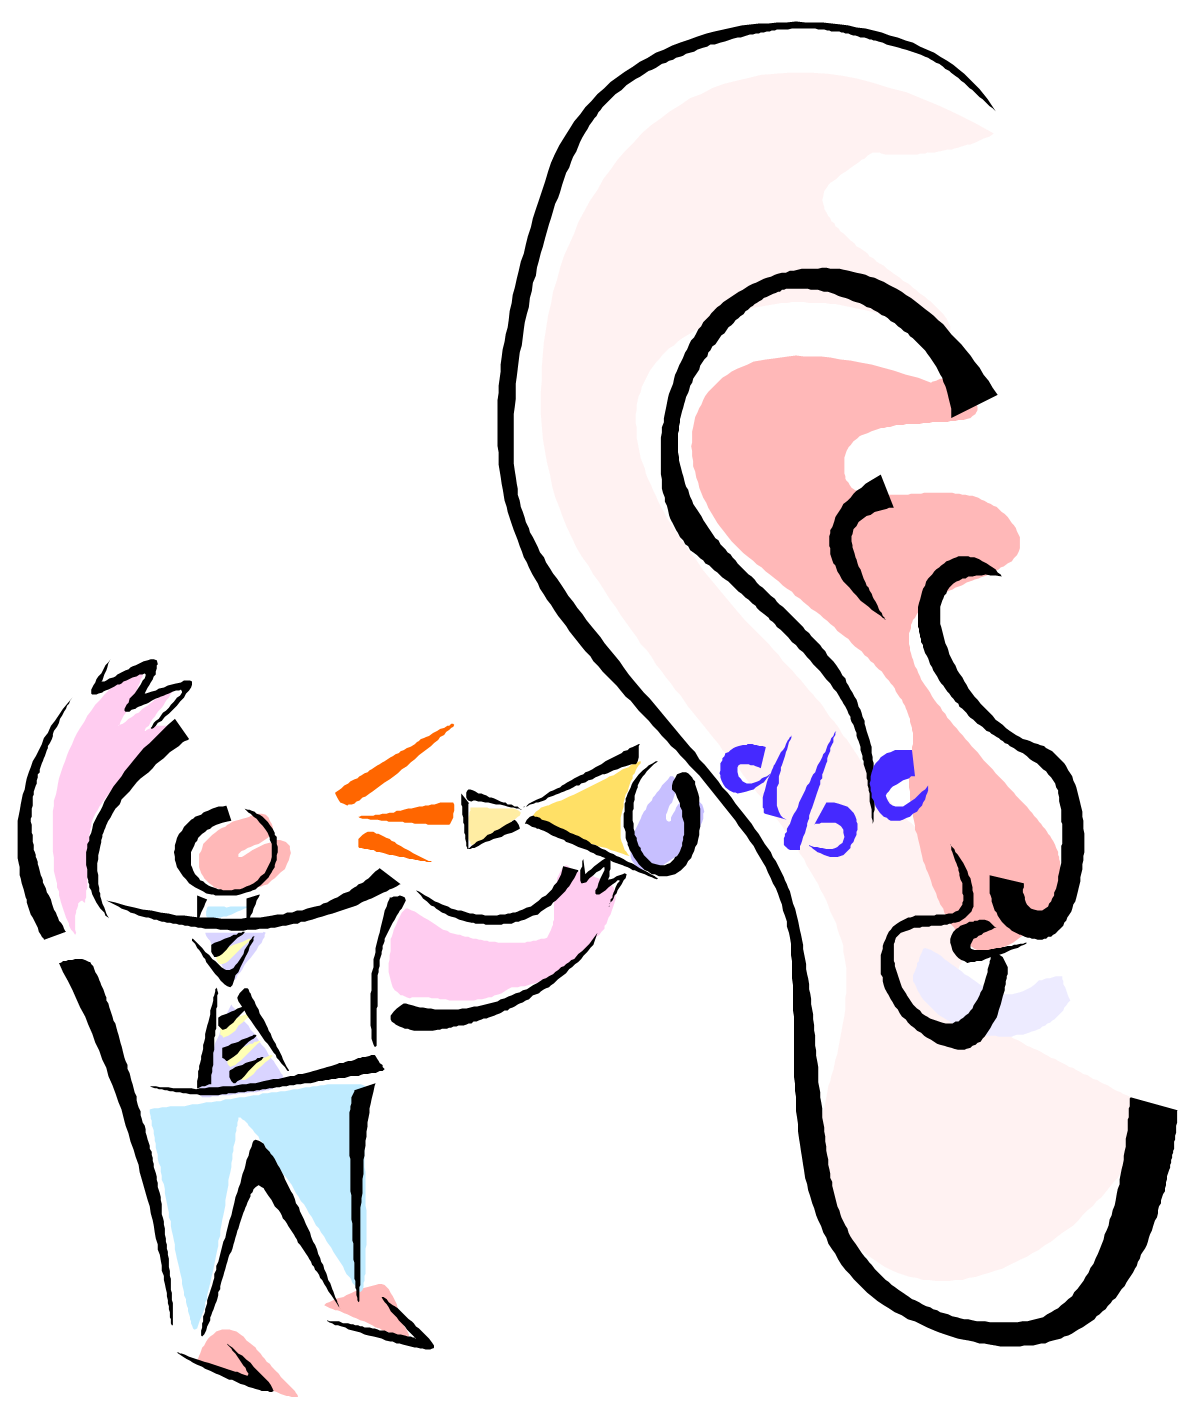 Listening Ear PNG Image